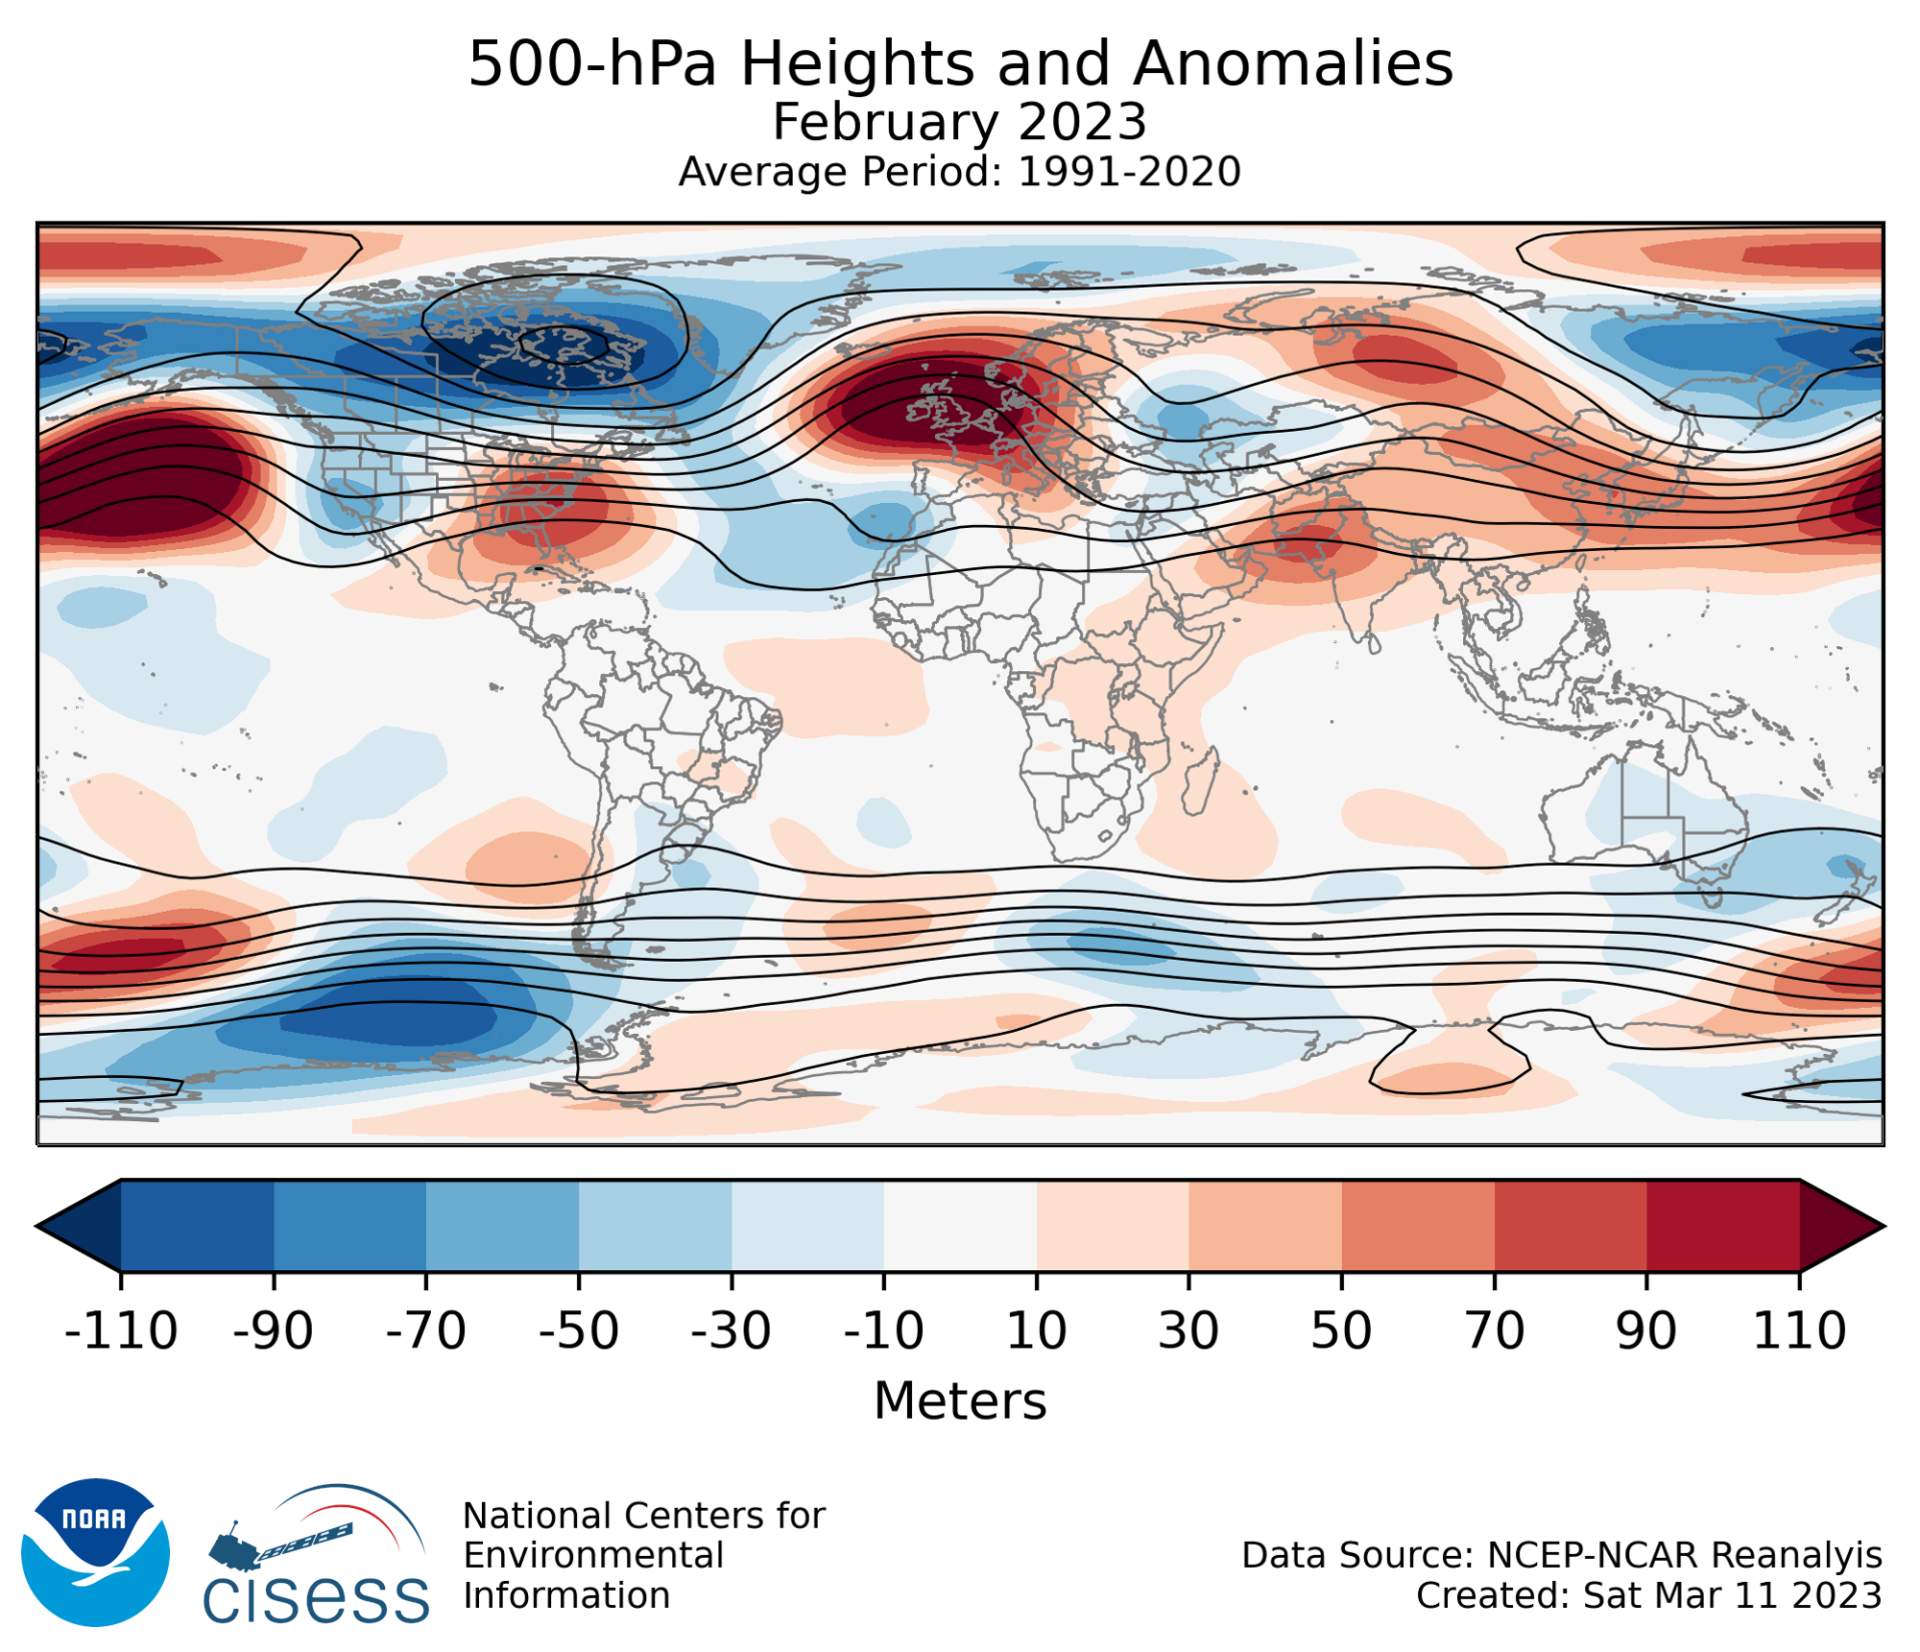 Anomalies at 500 hPa in February 2023; Source: NOAA